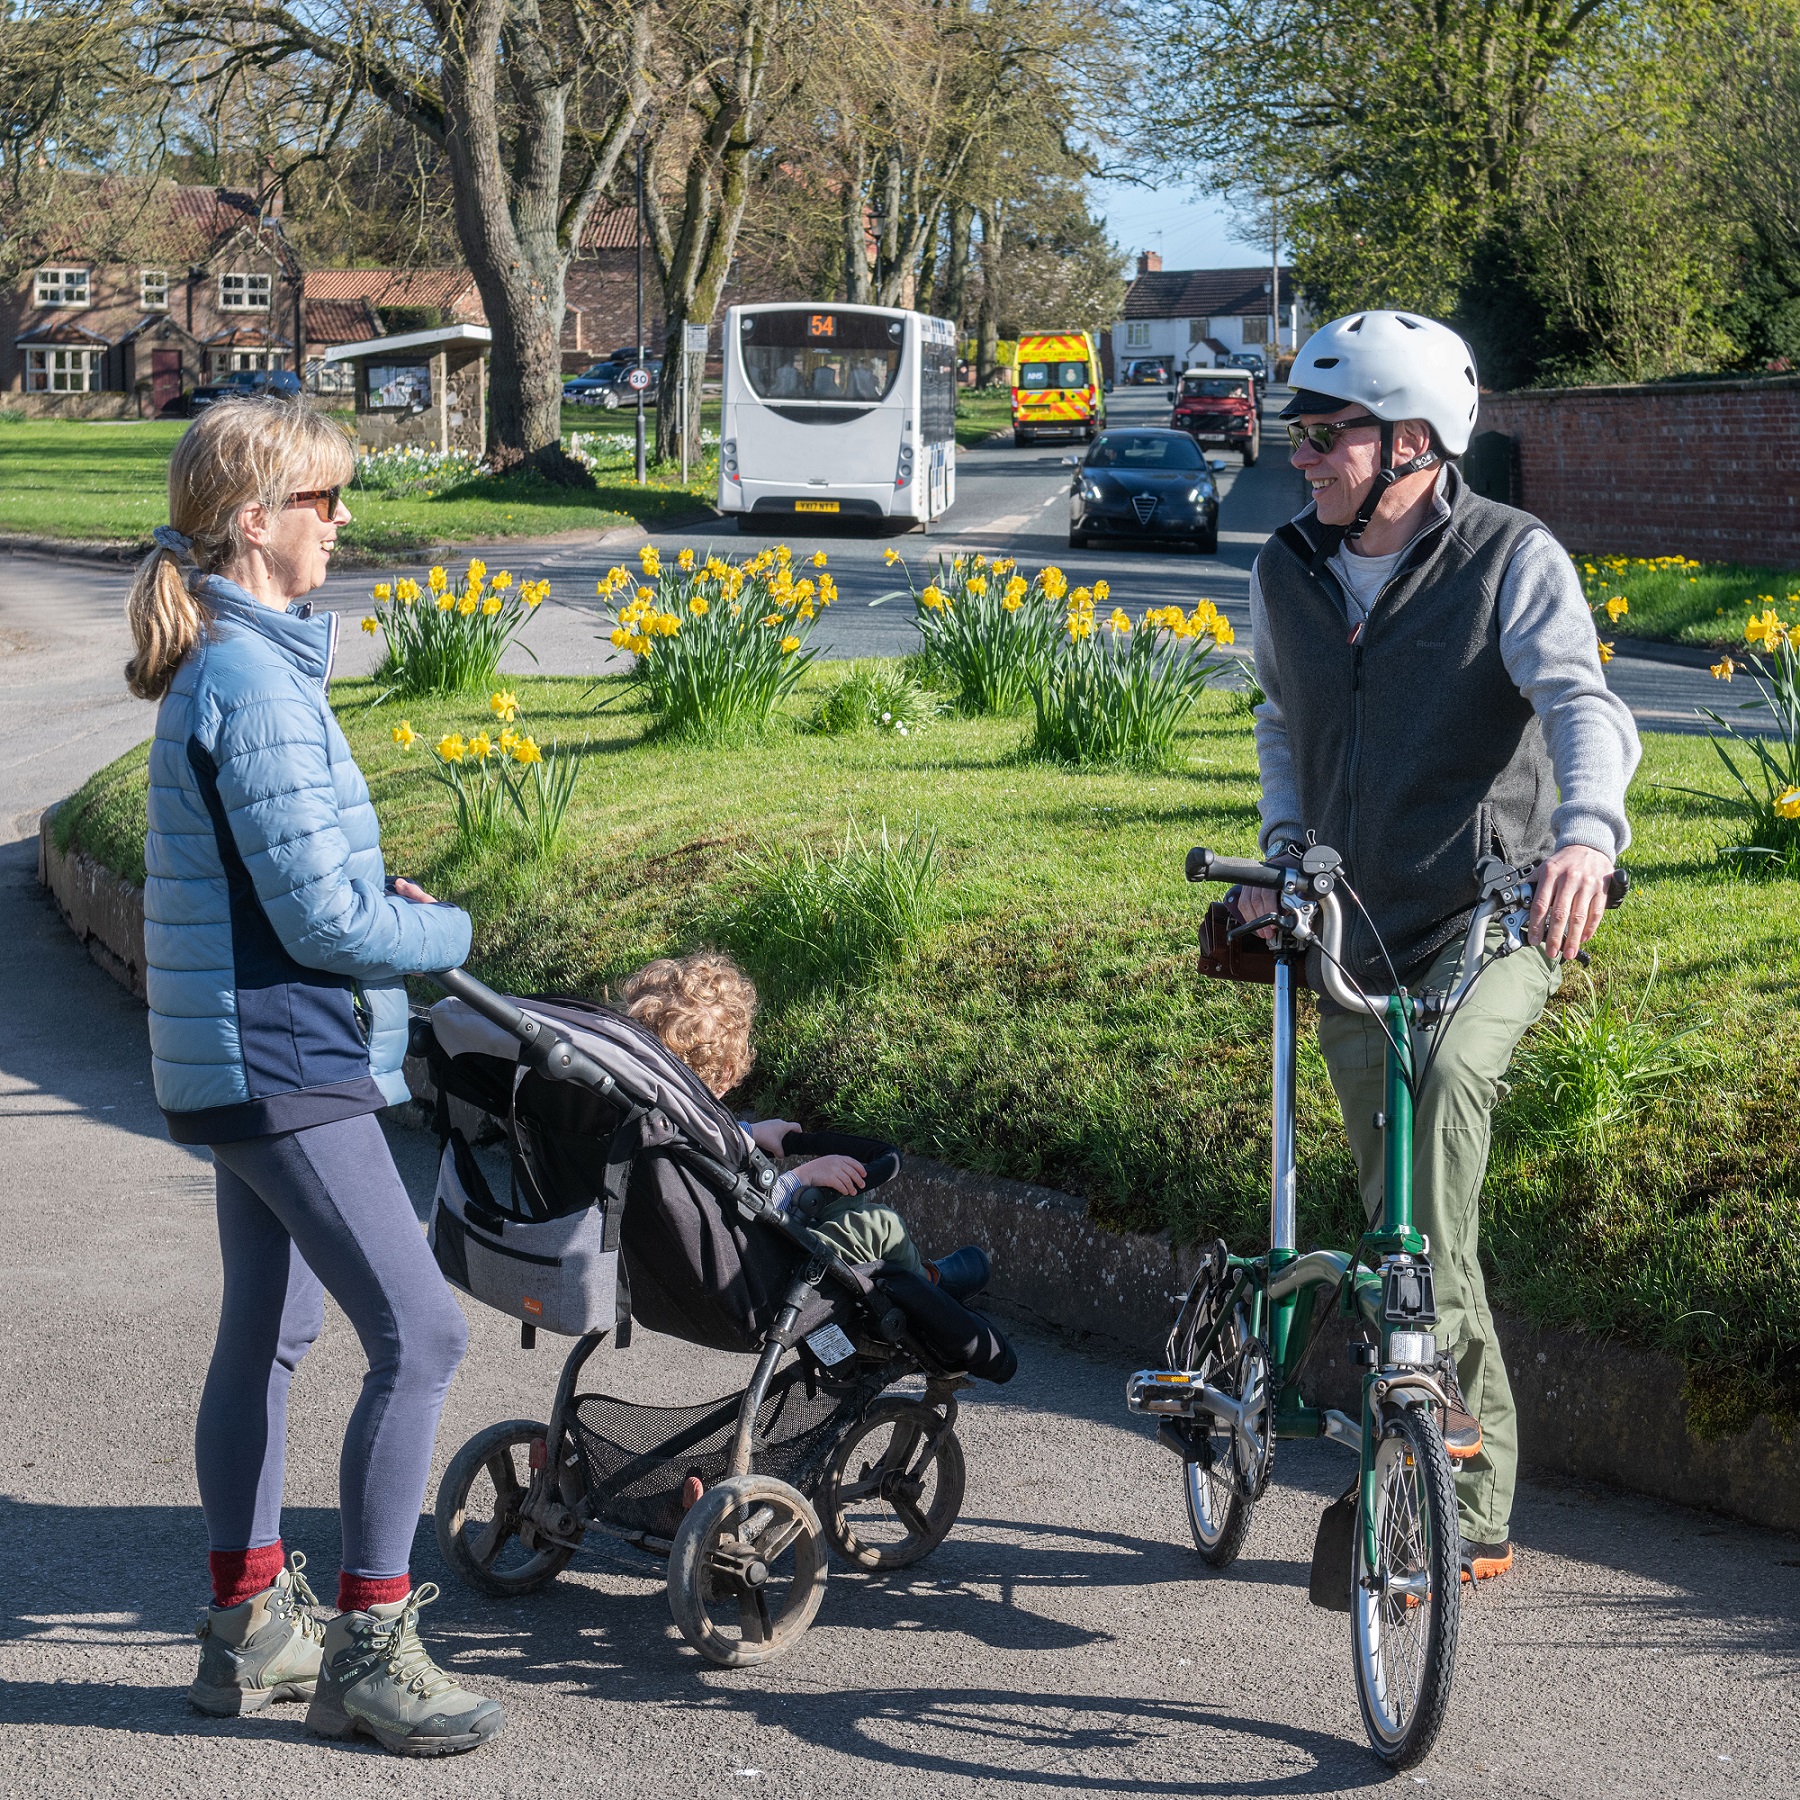 A lady with a buggy stood with a man holding a bike